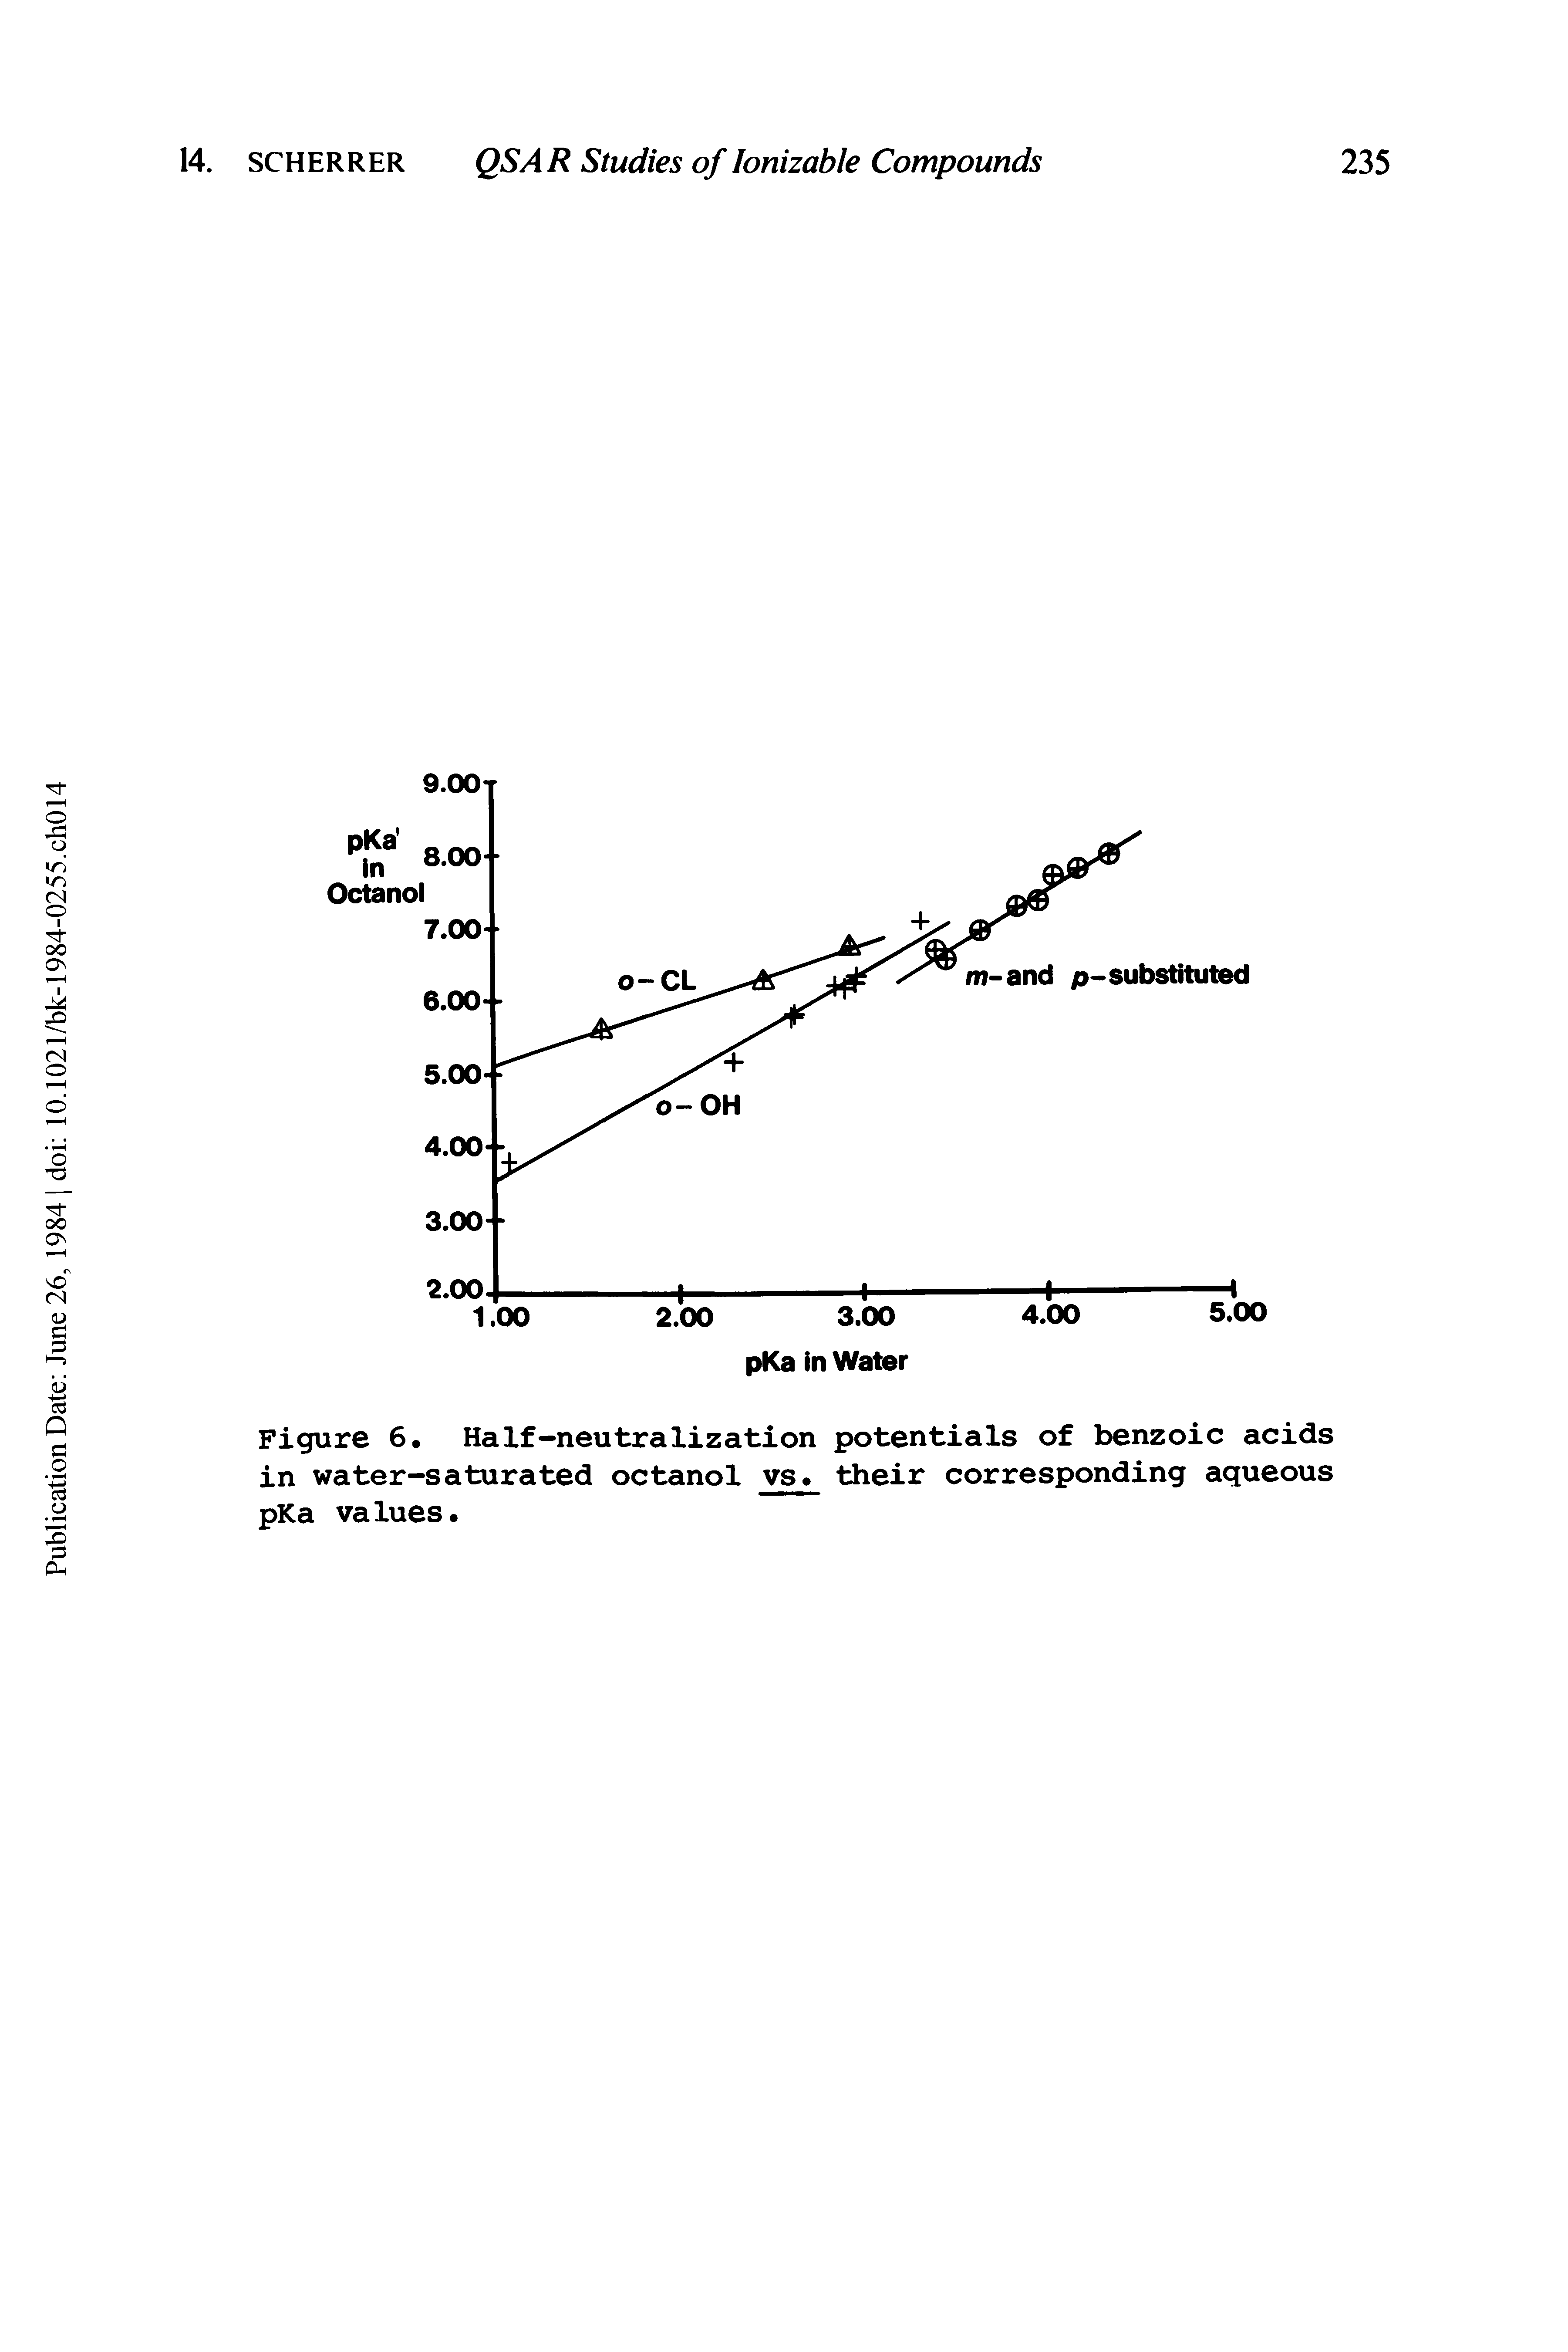 Figure 6, HaIf-neutralization potentials of benzoic acids in water-saturated octanol vs their corresponding aqueous pKa values.